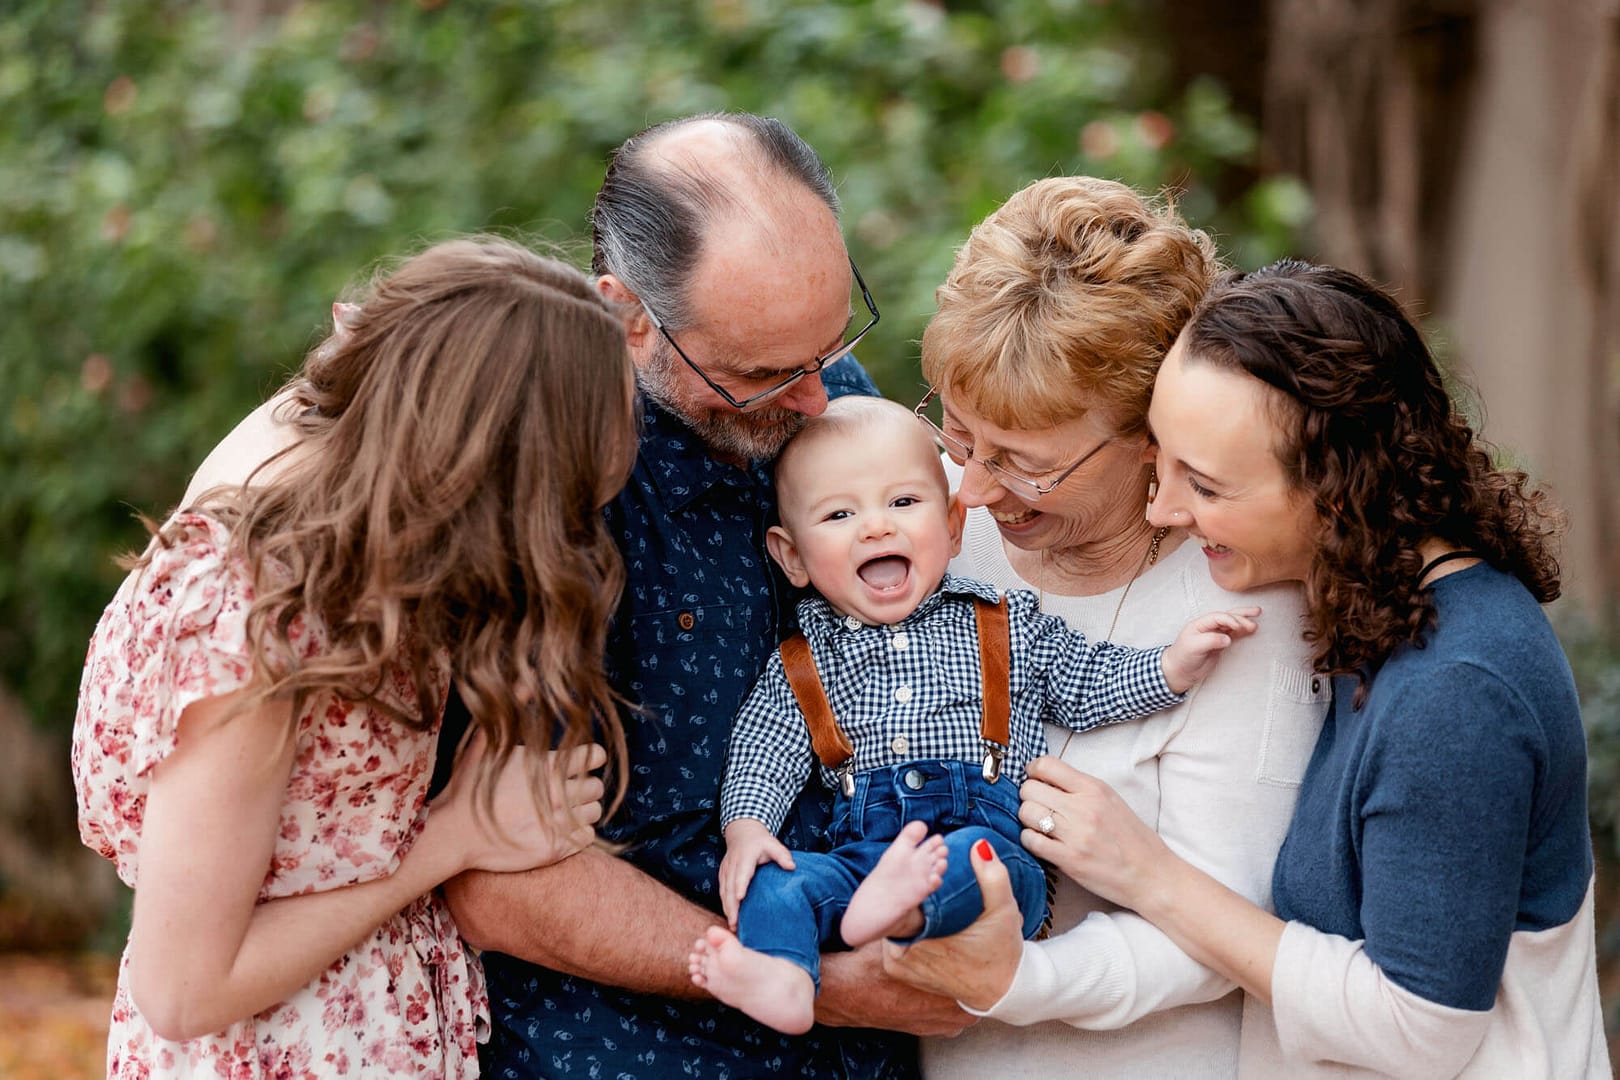 Balboa Park is one of the Best Locations for San Diego Family Photos as shown by this beautiful family picture of three generations